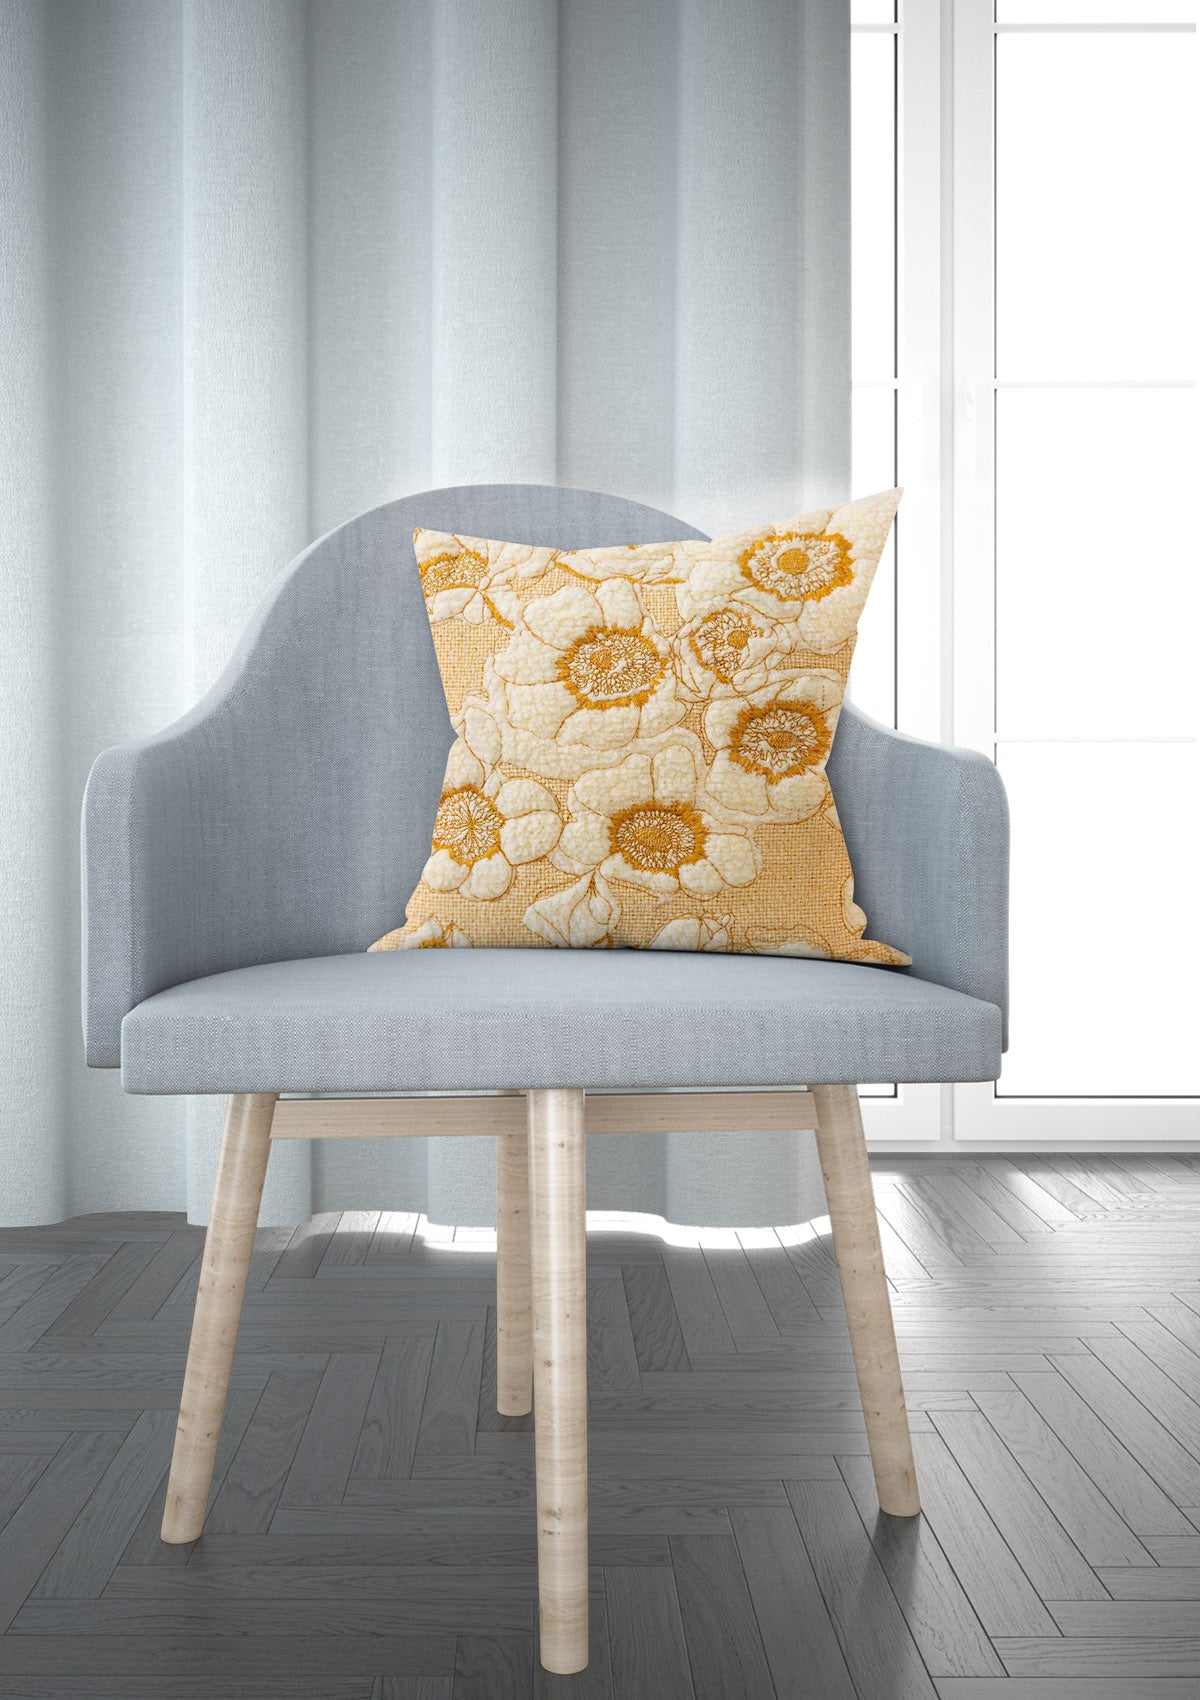 Whimsical daisy cushion cover featuring bright yellow petals